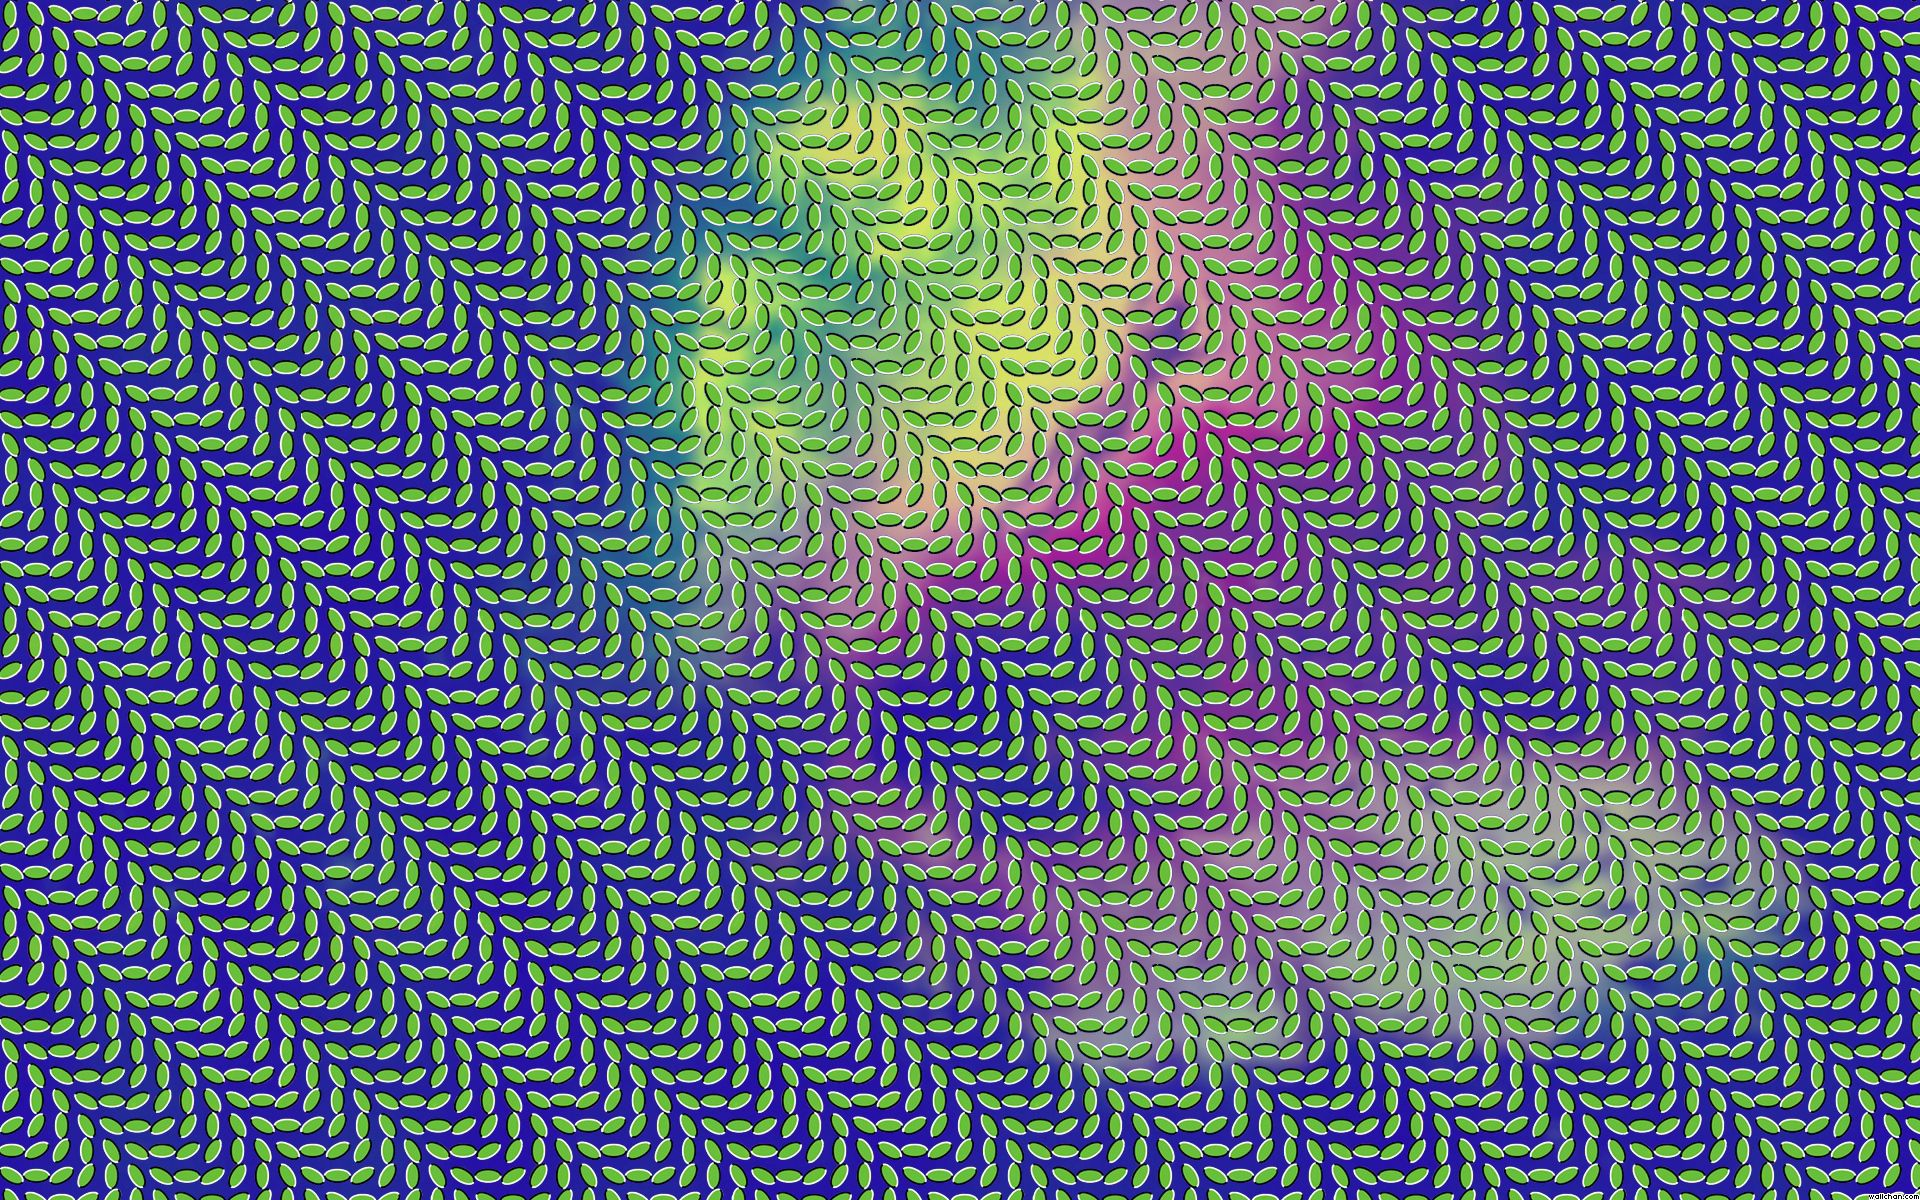 1920x1200 Mobile wallpaper: Abstract, Shine, Light, Multicolored, Motley, Lines, Surface, Optical Illusion, 98669 download the picture for free